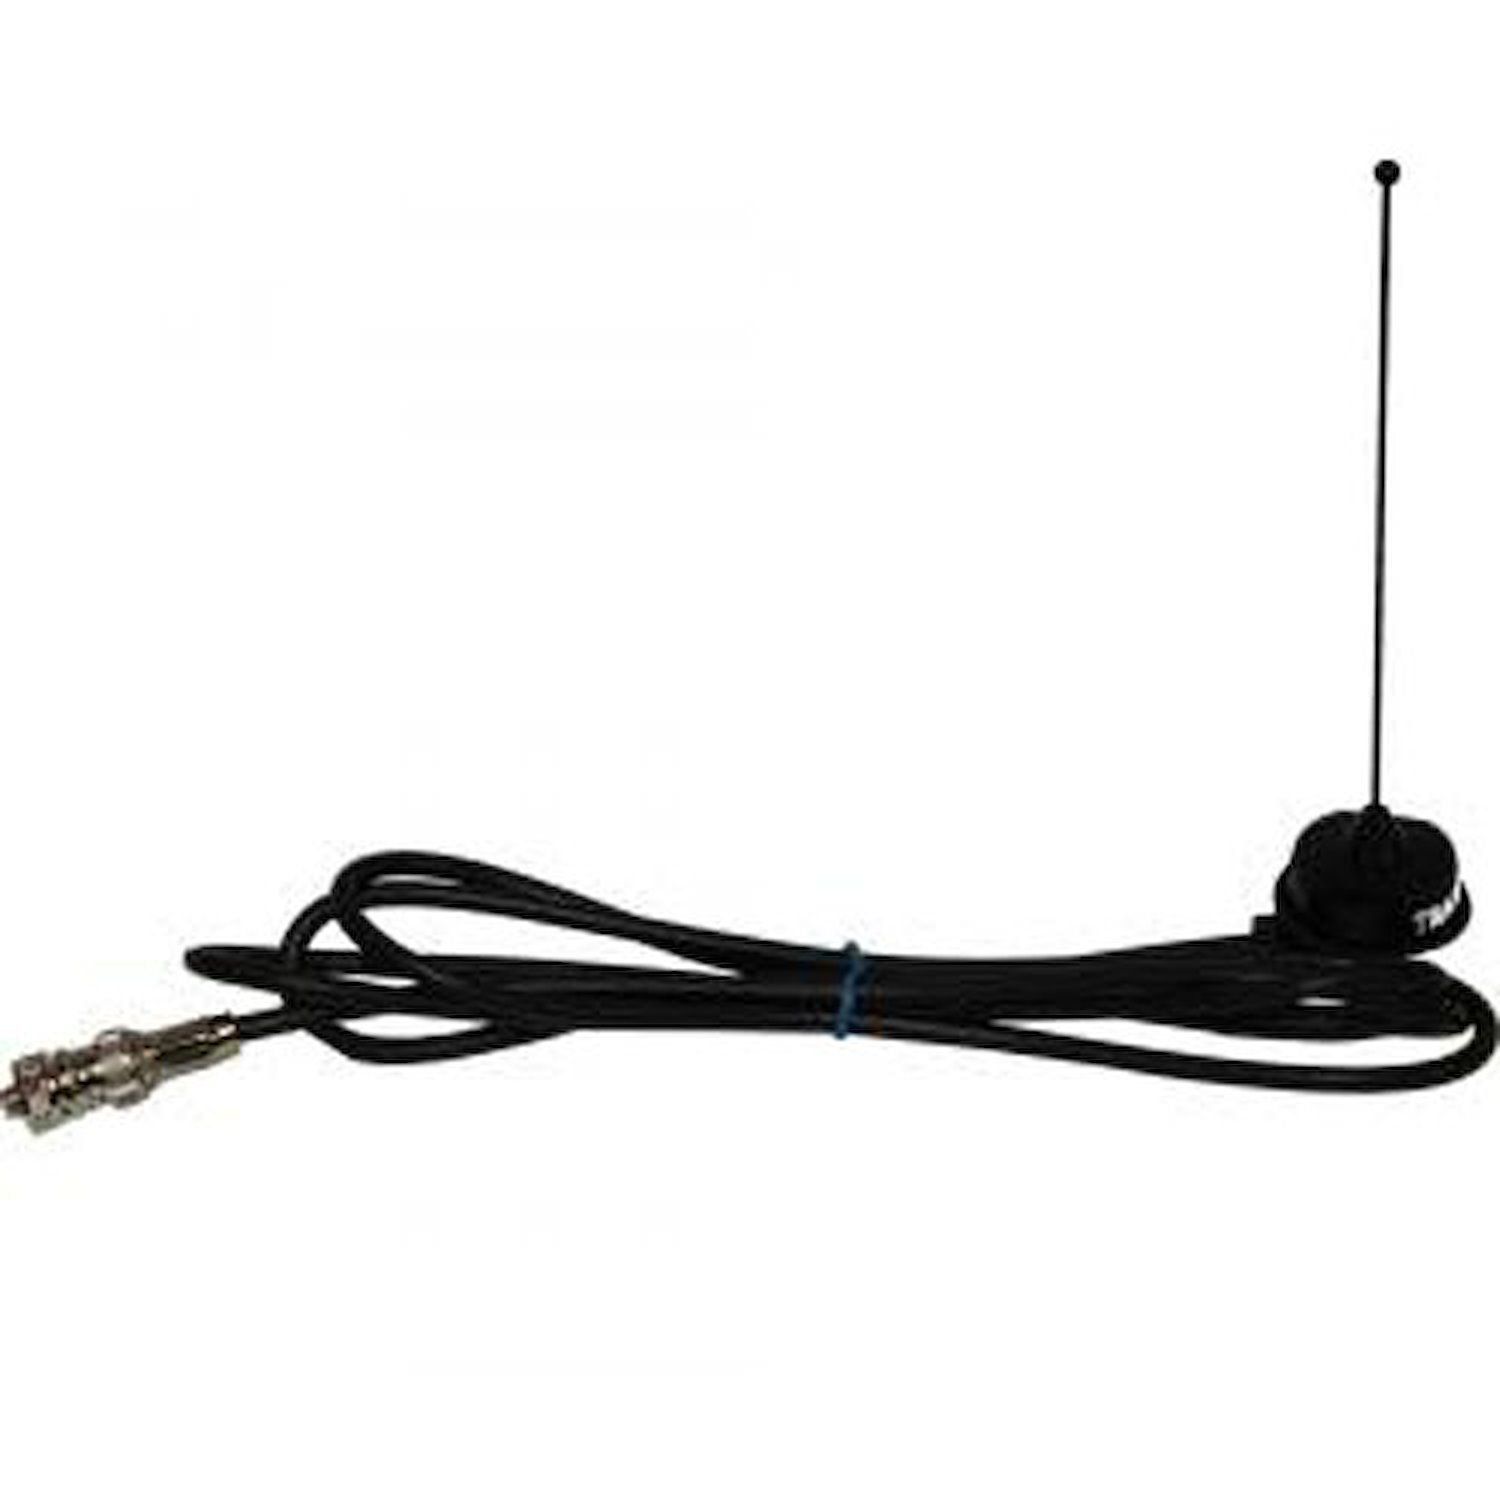 Antenna for Vehicle w/ Adapter